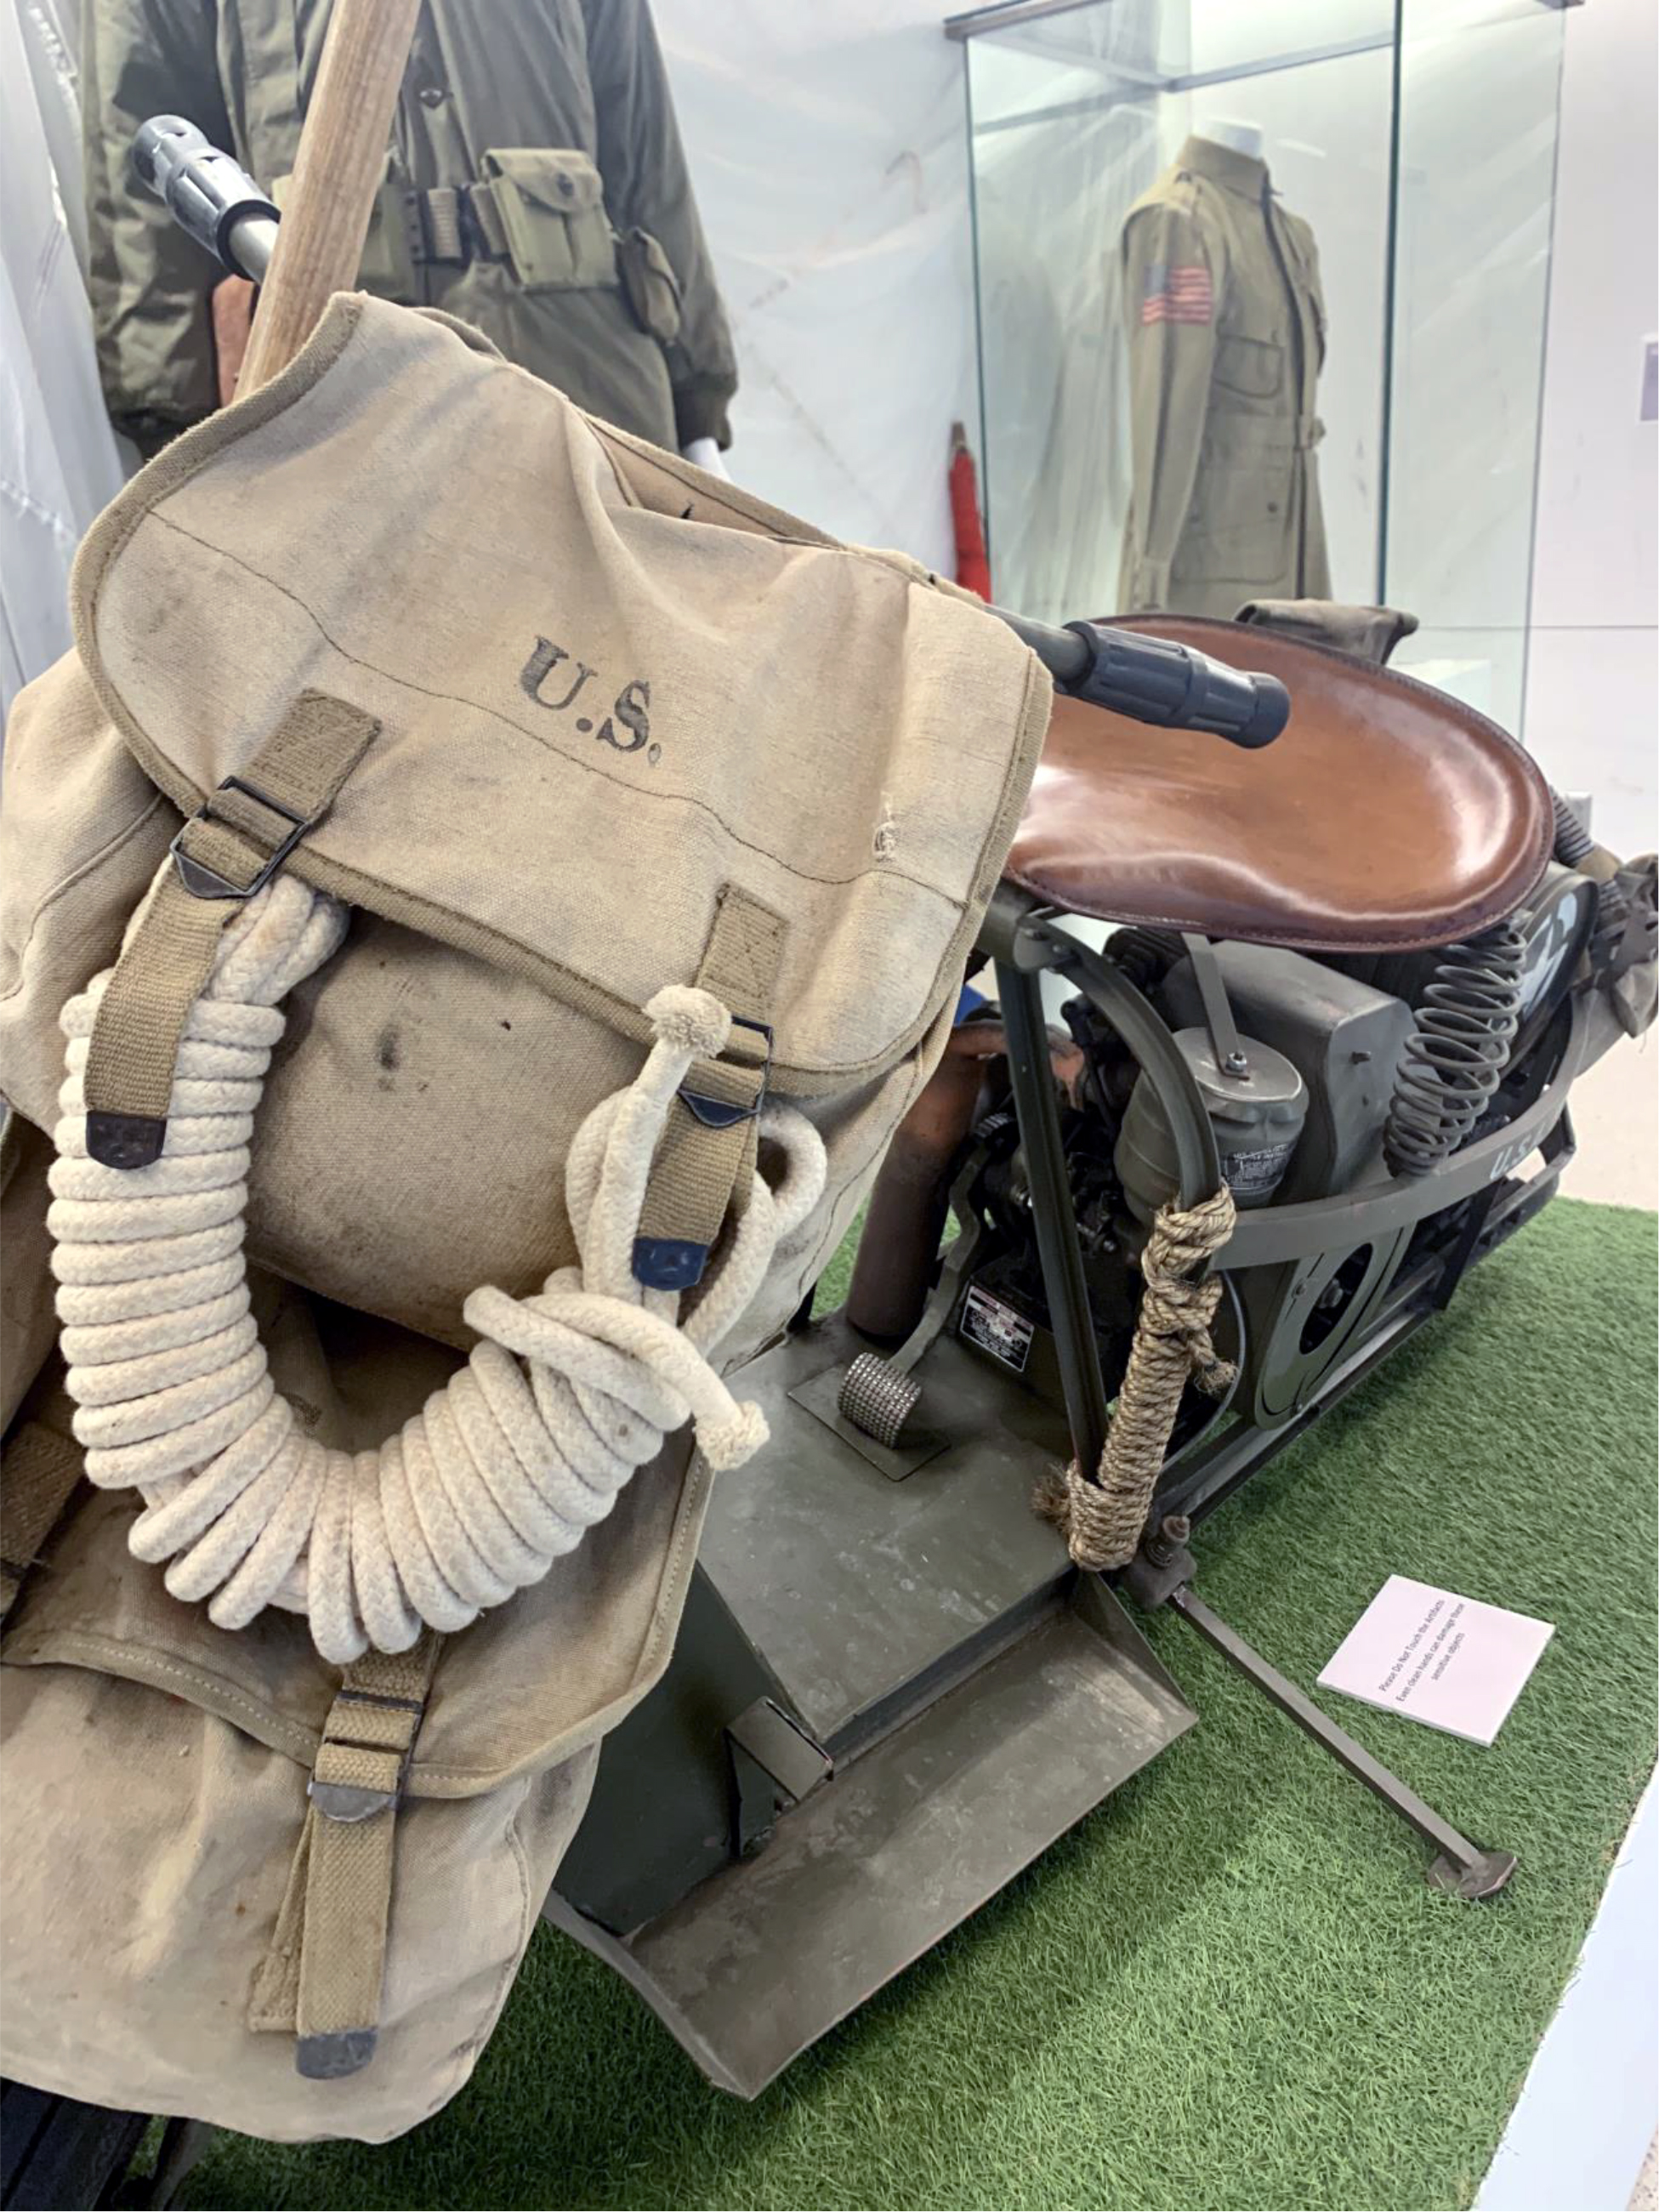 Color photograph, museum display of WWII era motorbike, U.S. Army issued backpack, and rope.